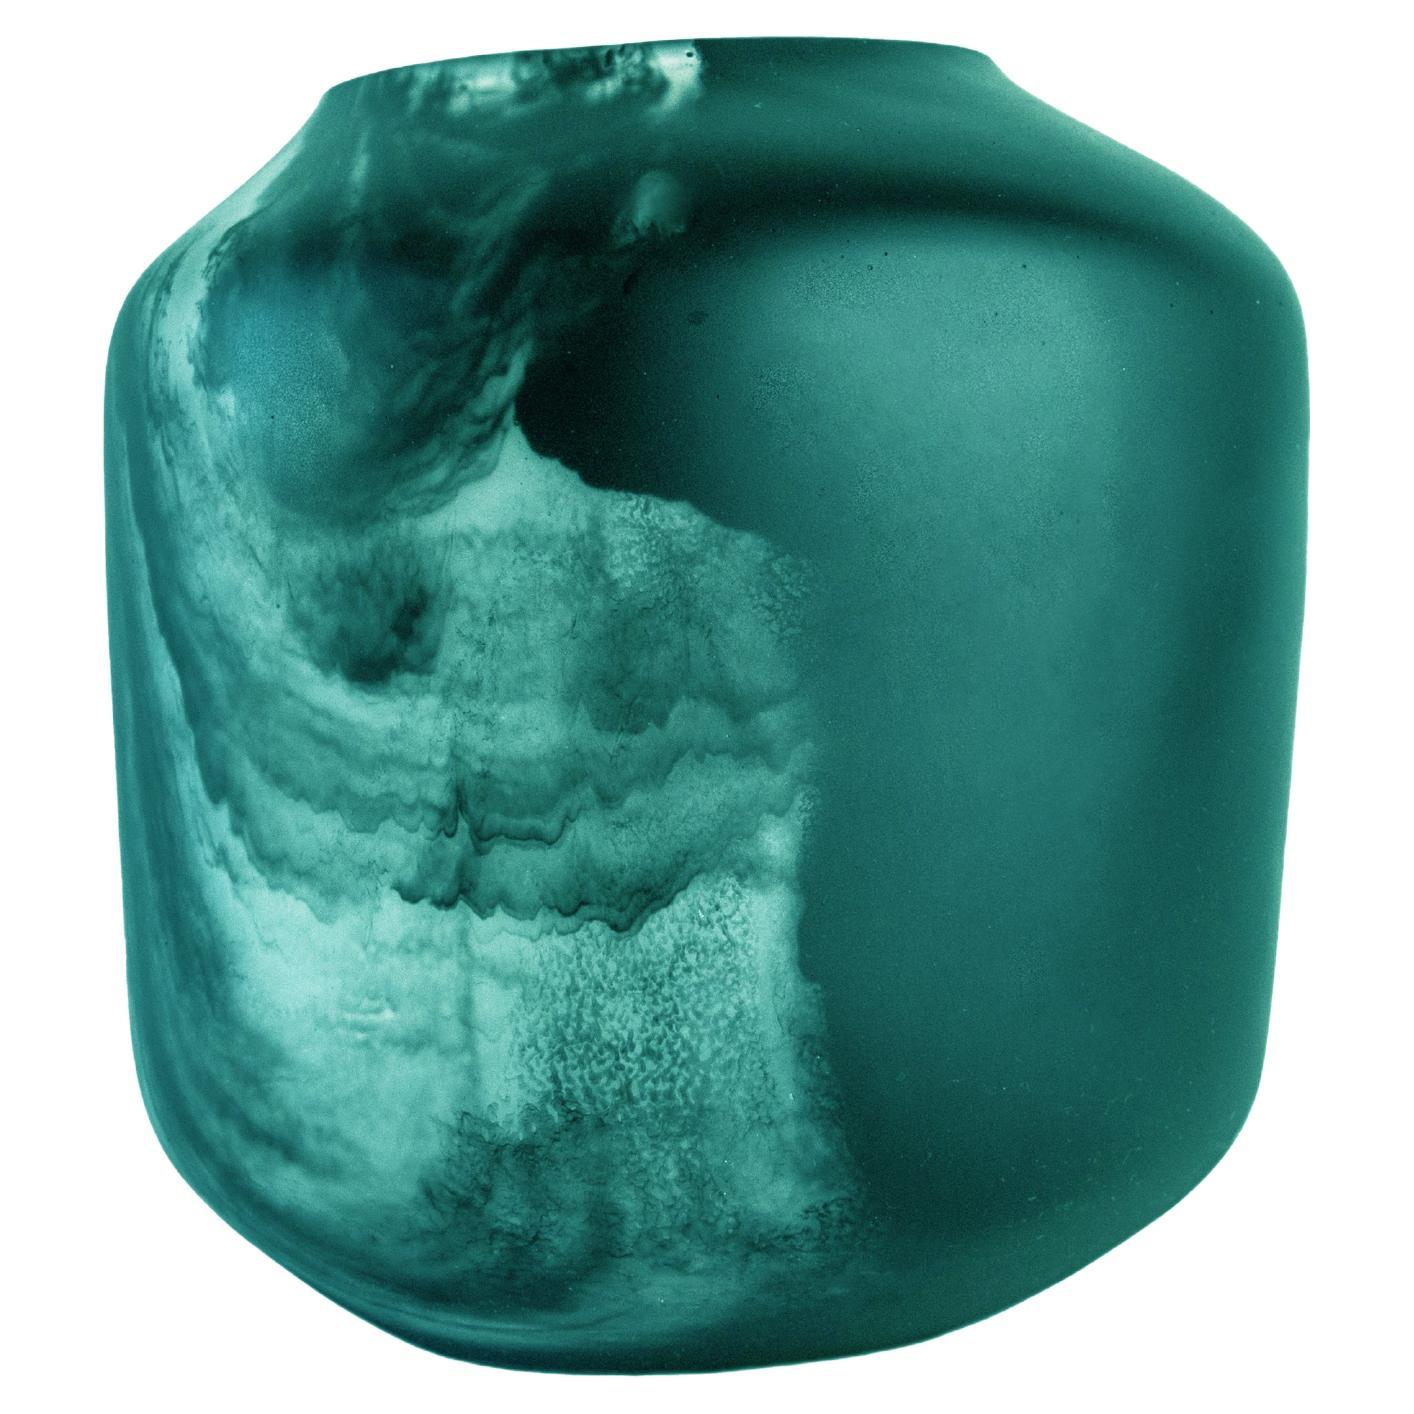 Modern 21st Century "Emerald Green Smoke Low Tara" Resin Vase from Mexico For Sale